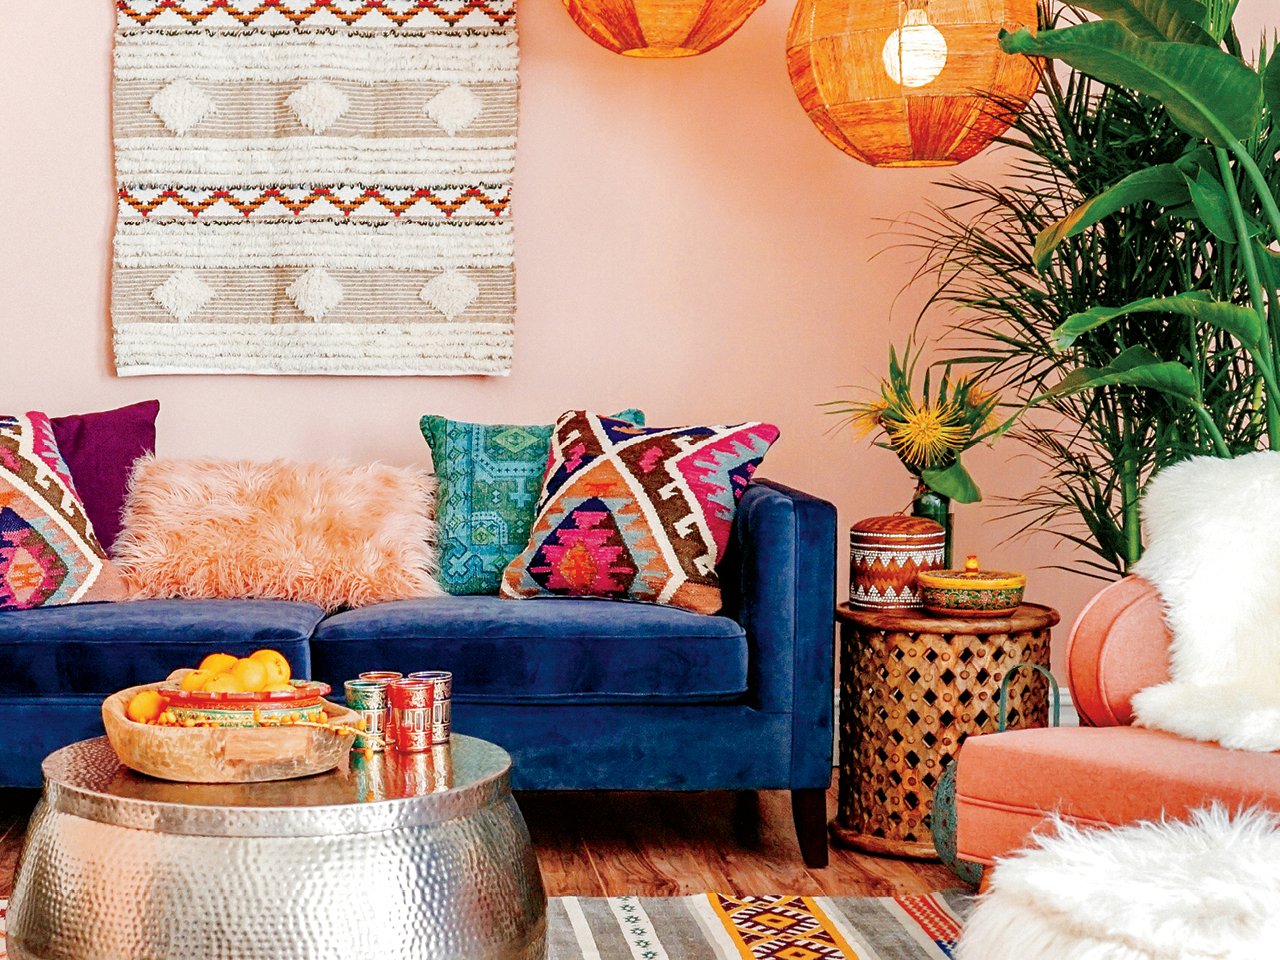 A room decorated with patterns to illustrate an article about how to mix patterns in home decor.